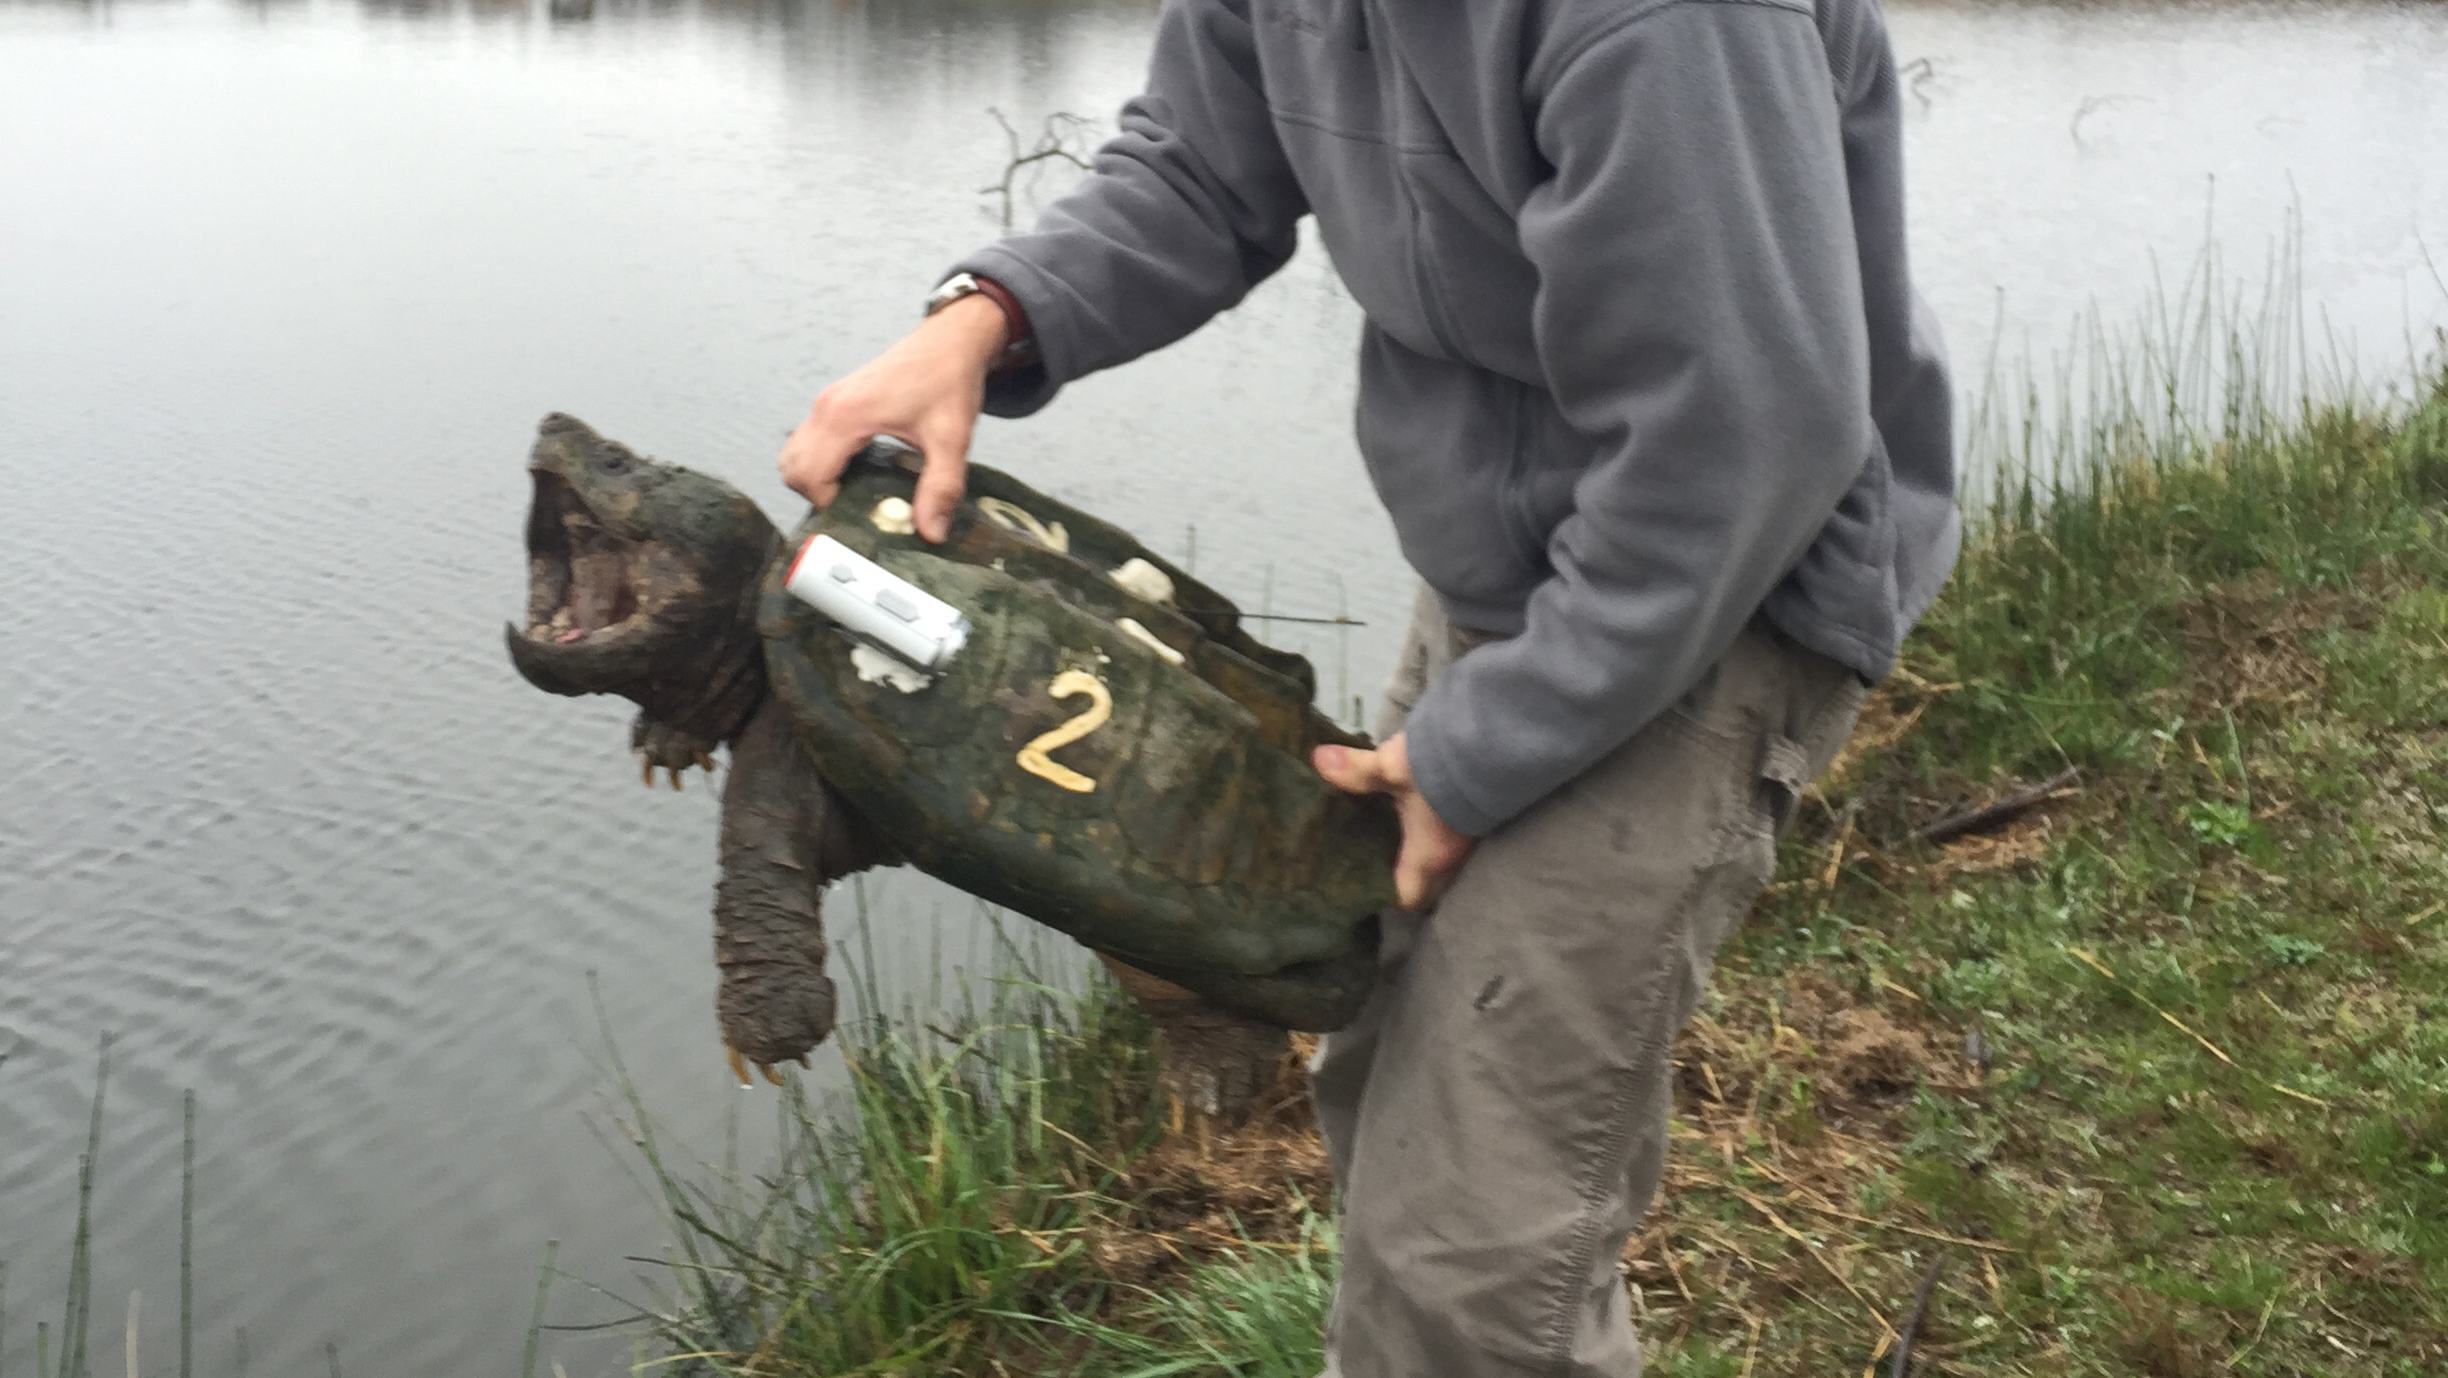 Biologist works to rebuild families of alligator snapping turtles ...